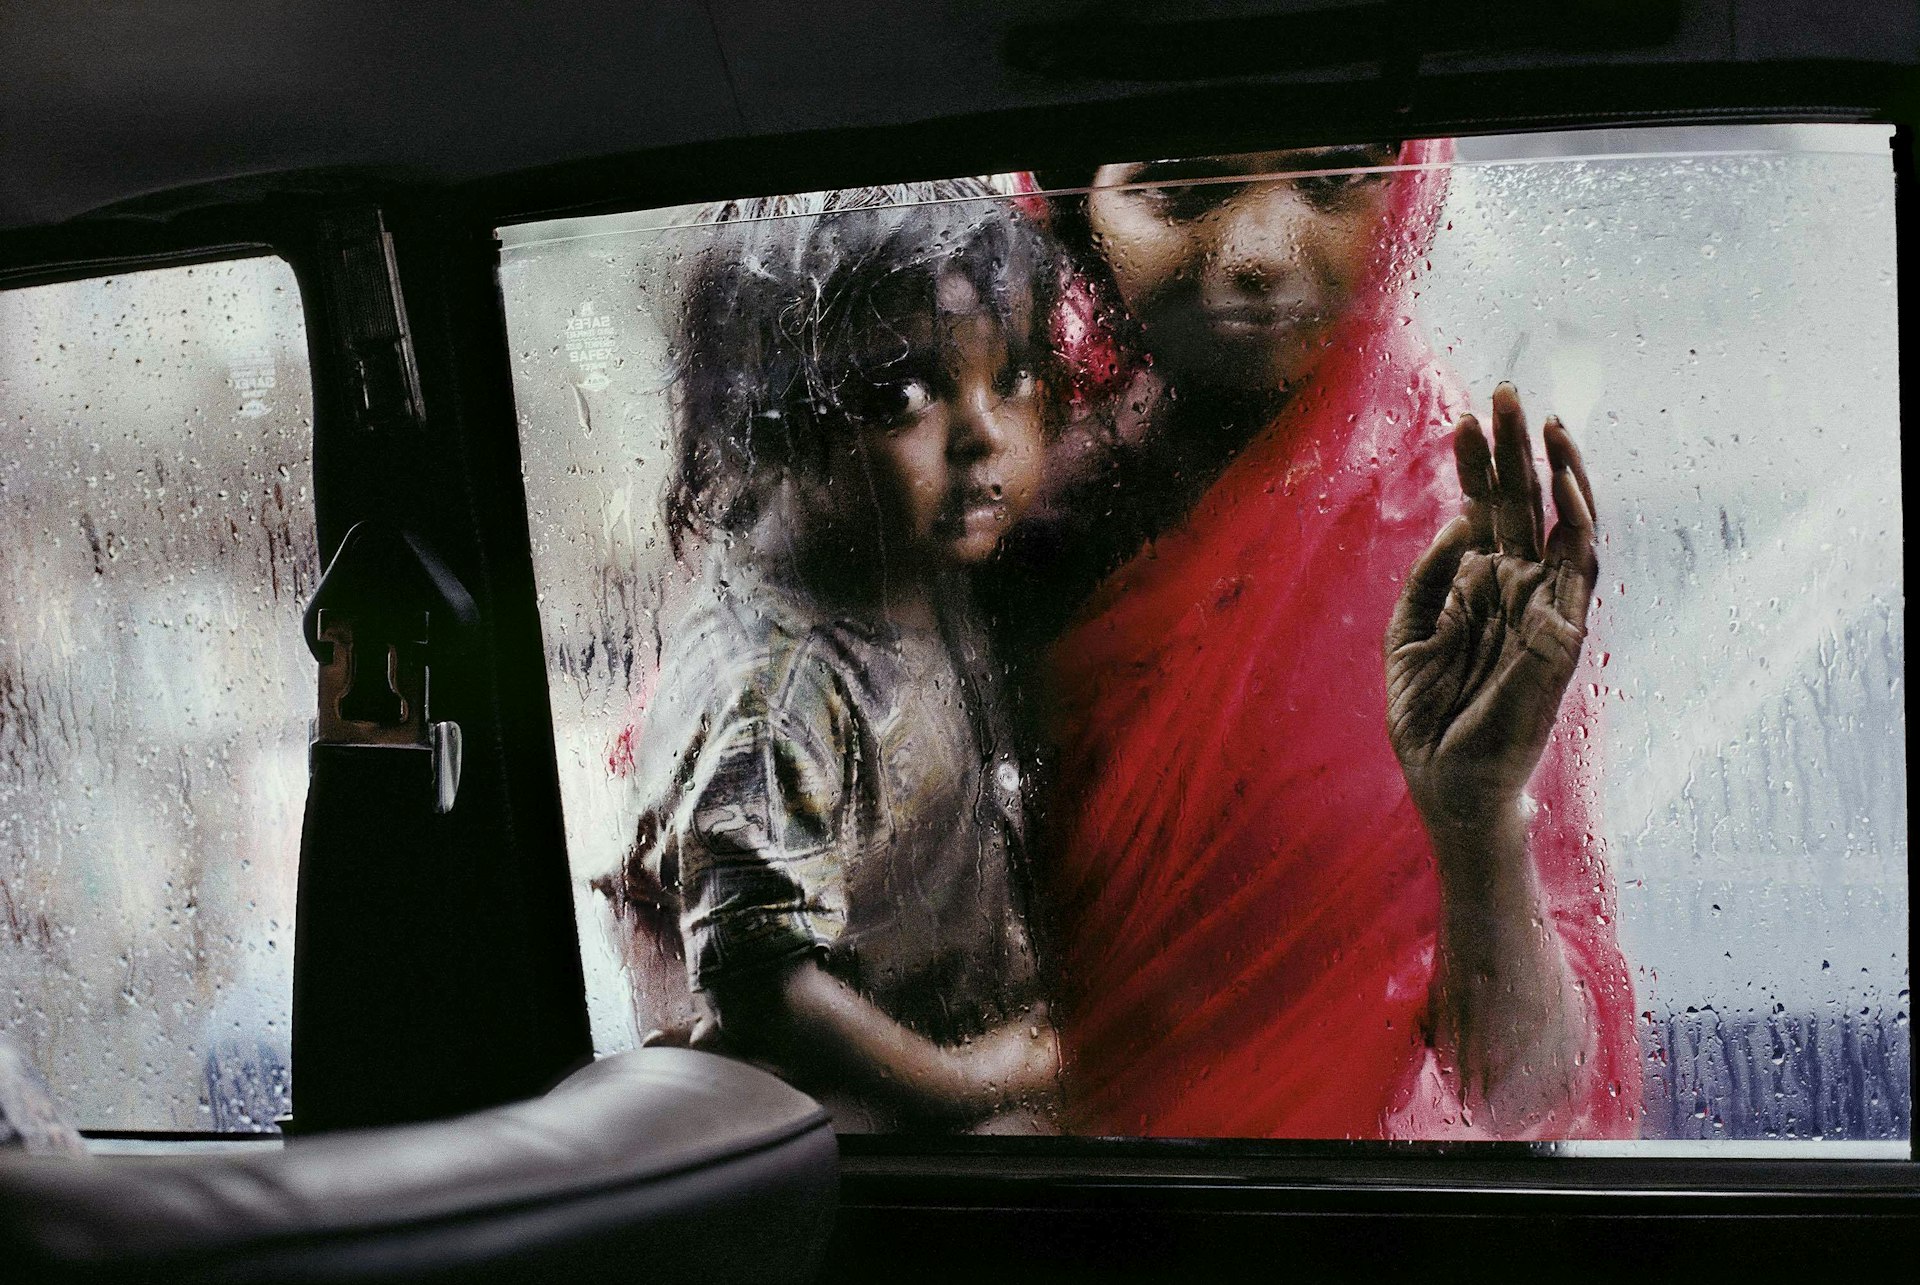 Steve McCurry looks back on a life in photography